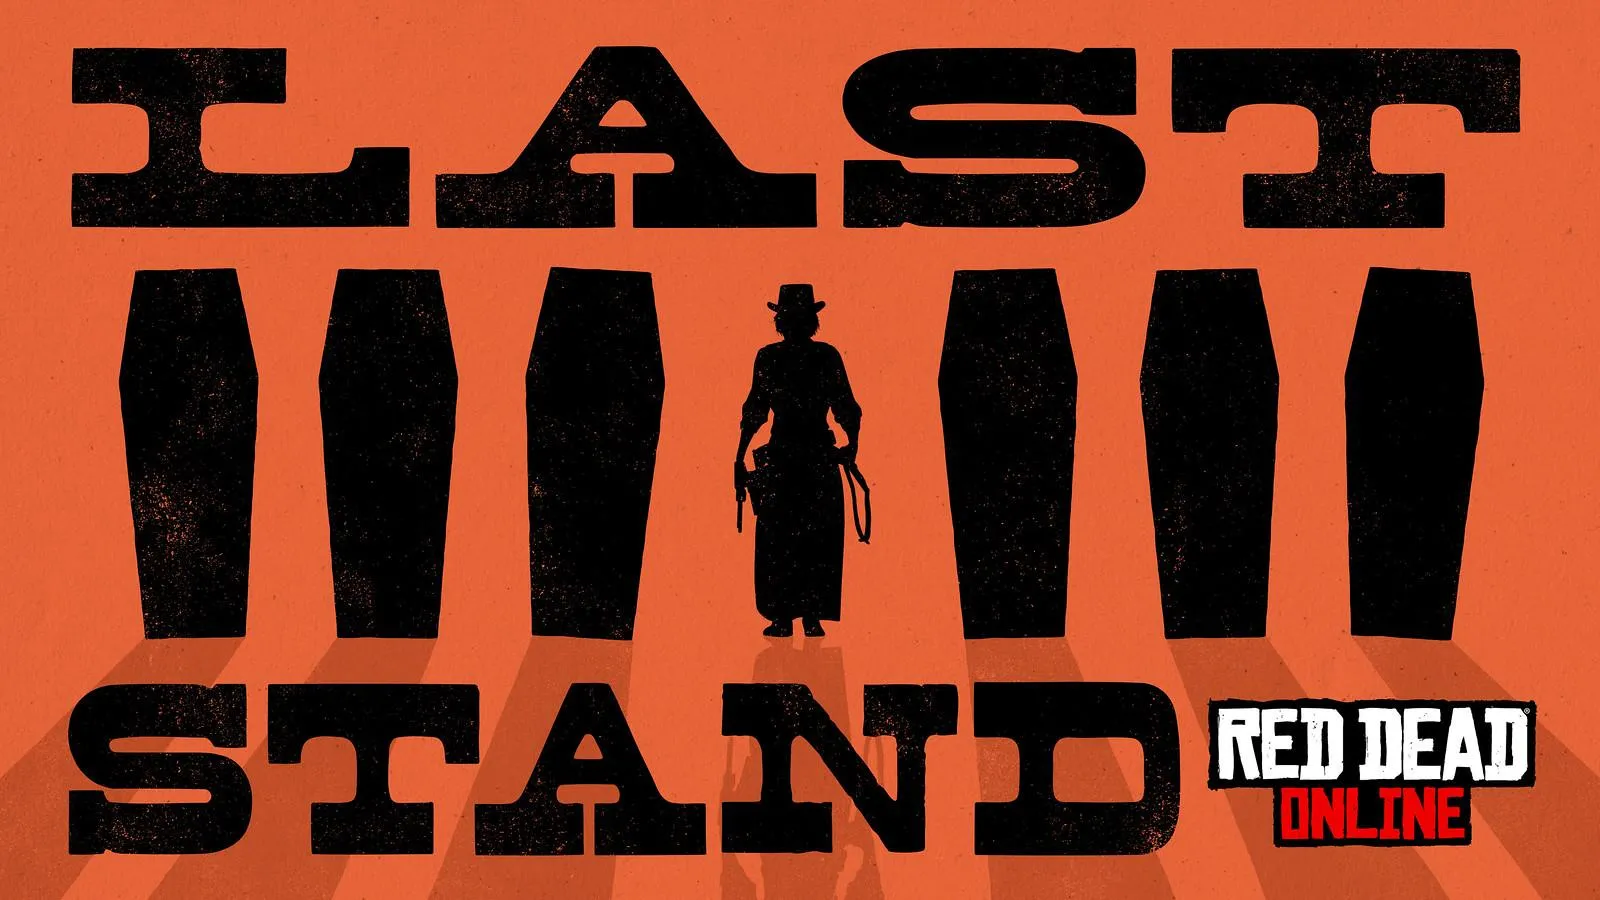 Last Stand - Red Dead Online Mode